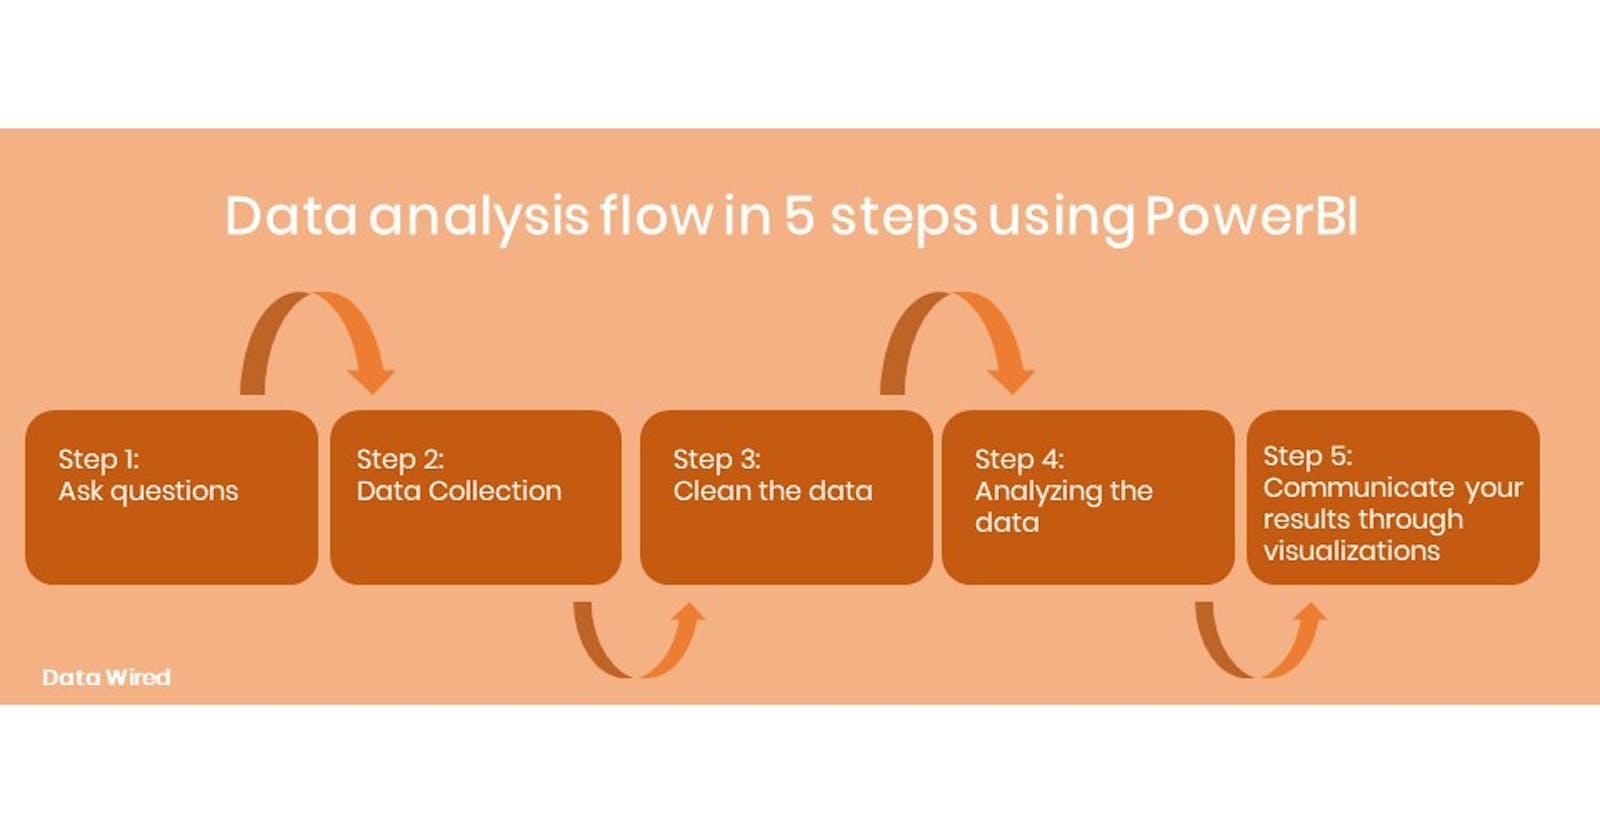 A 5 step approach to Data analysis in PowerBI